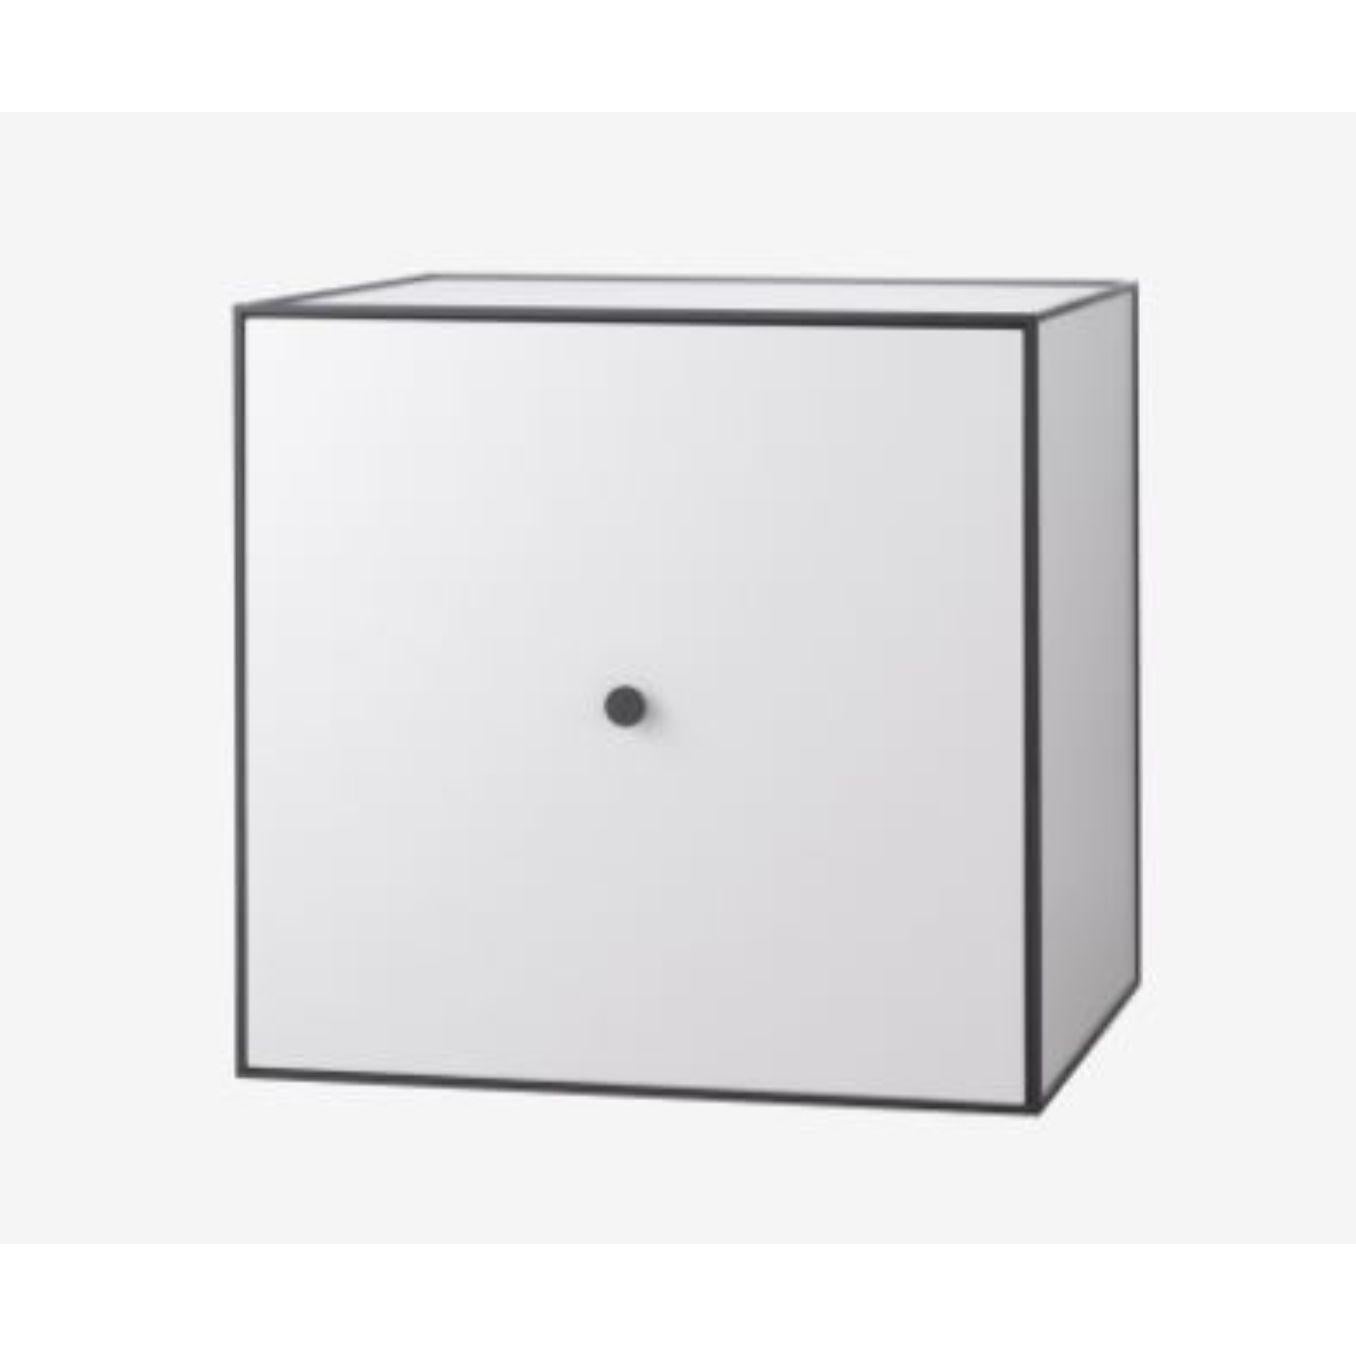 49 light grey frame box with door / shelf by Lassen
Dimensions: D 49 x W 42 x H 49 cm 
Materials: Finér, Melamin, Melamin, Melamine, Metal, Veneer
Also available in different colors and dimensions. 
Weight: 17 Kg


By Lassen is a Danish